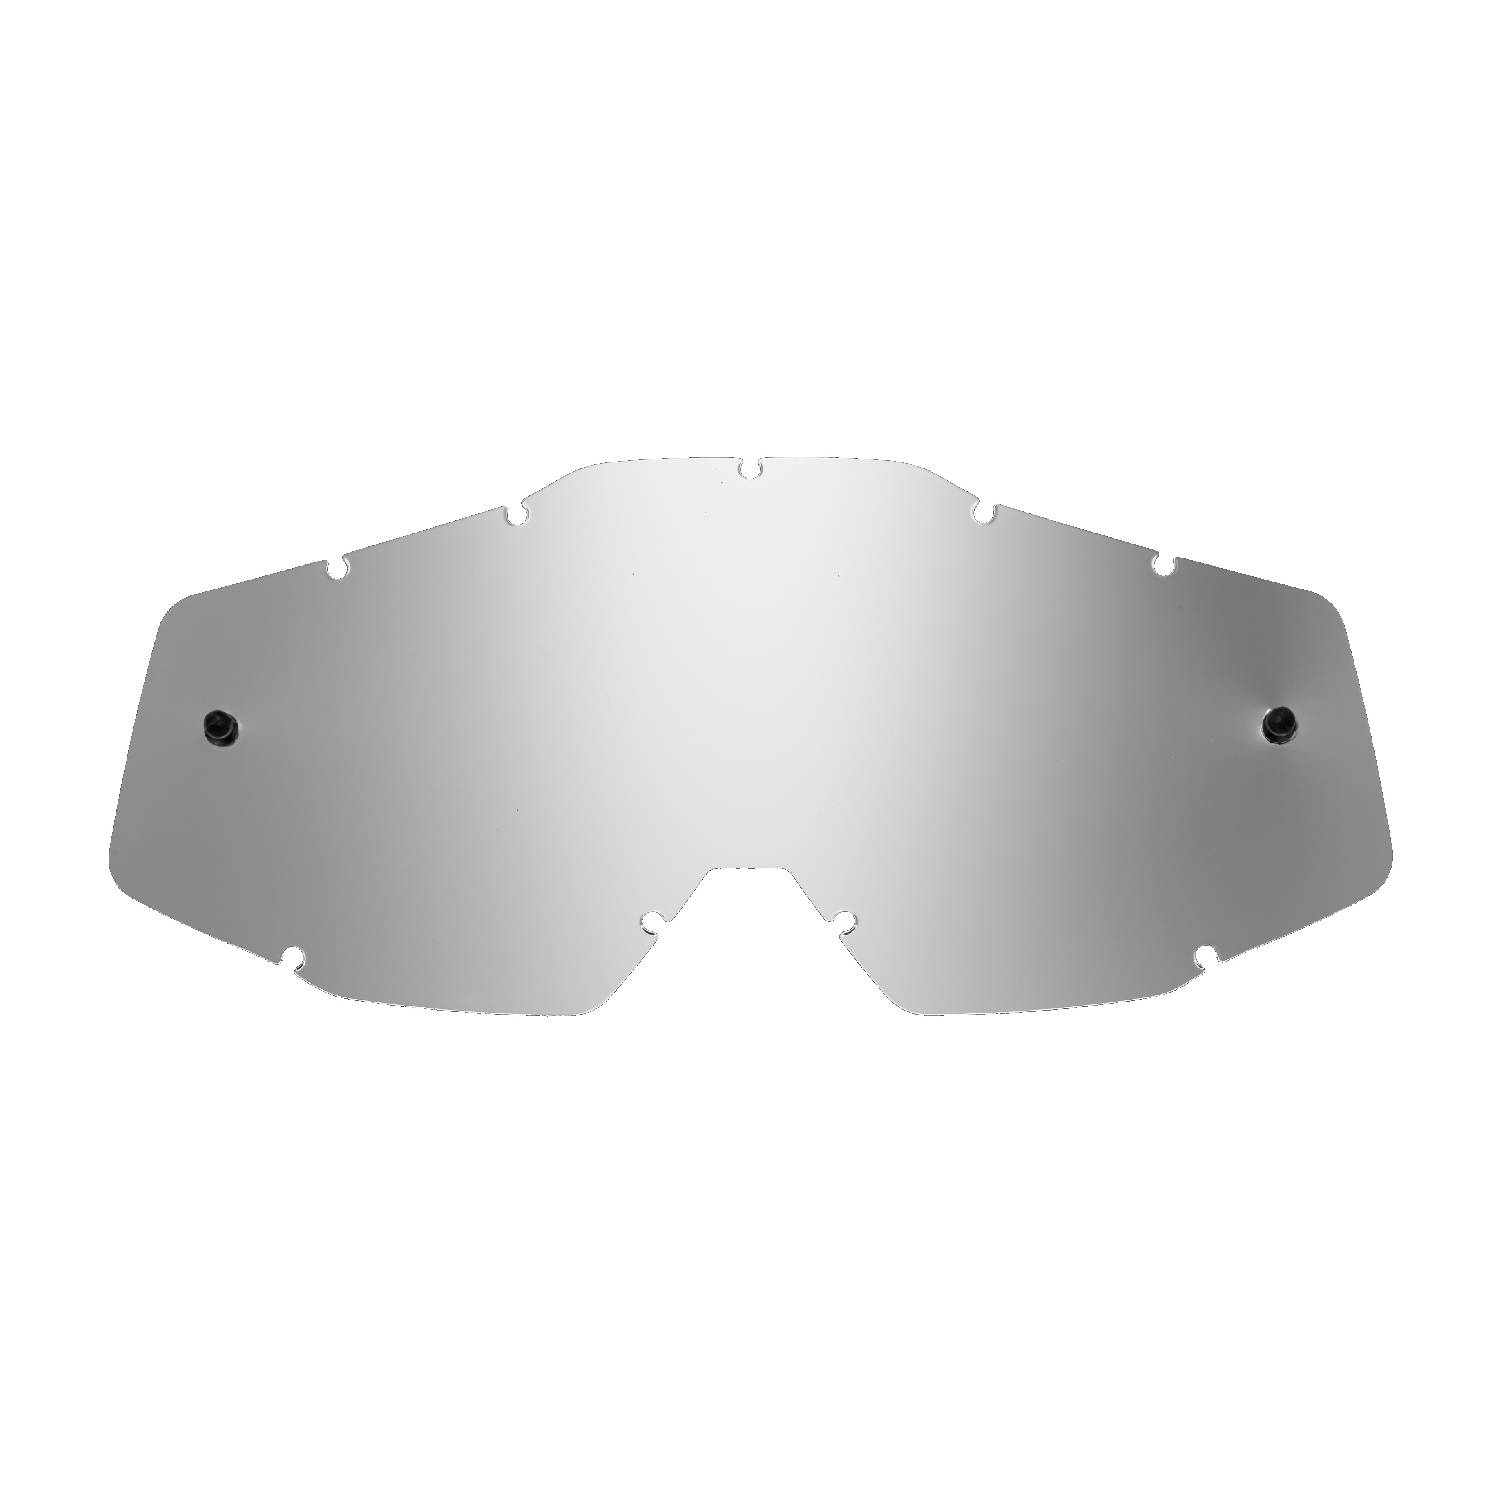 silver-toned mirrored replacement lenses for goggles compatible for 100% Racecraft / Strata / Accuri / Mercury goggle